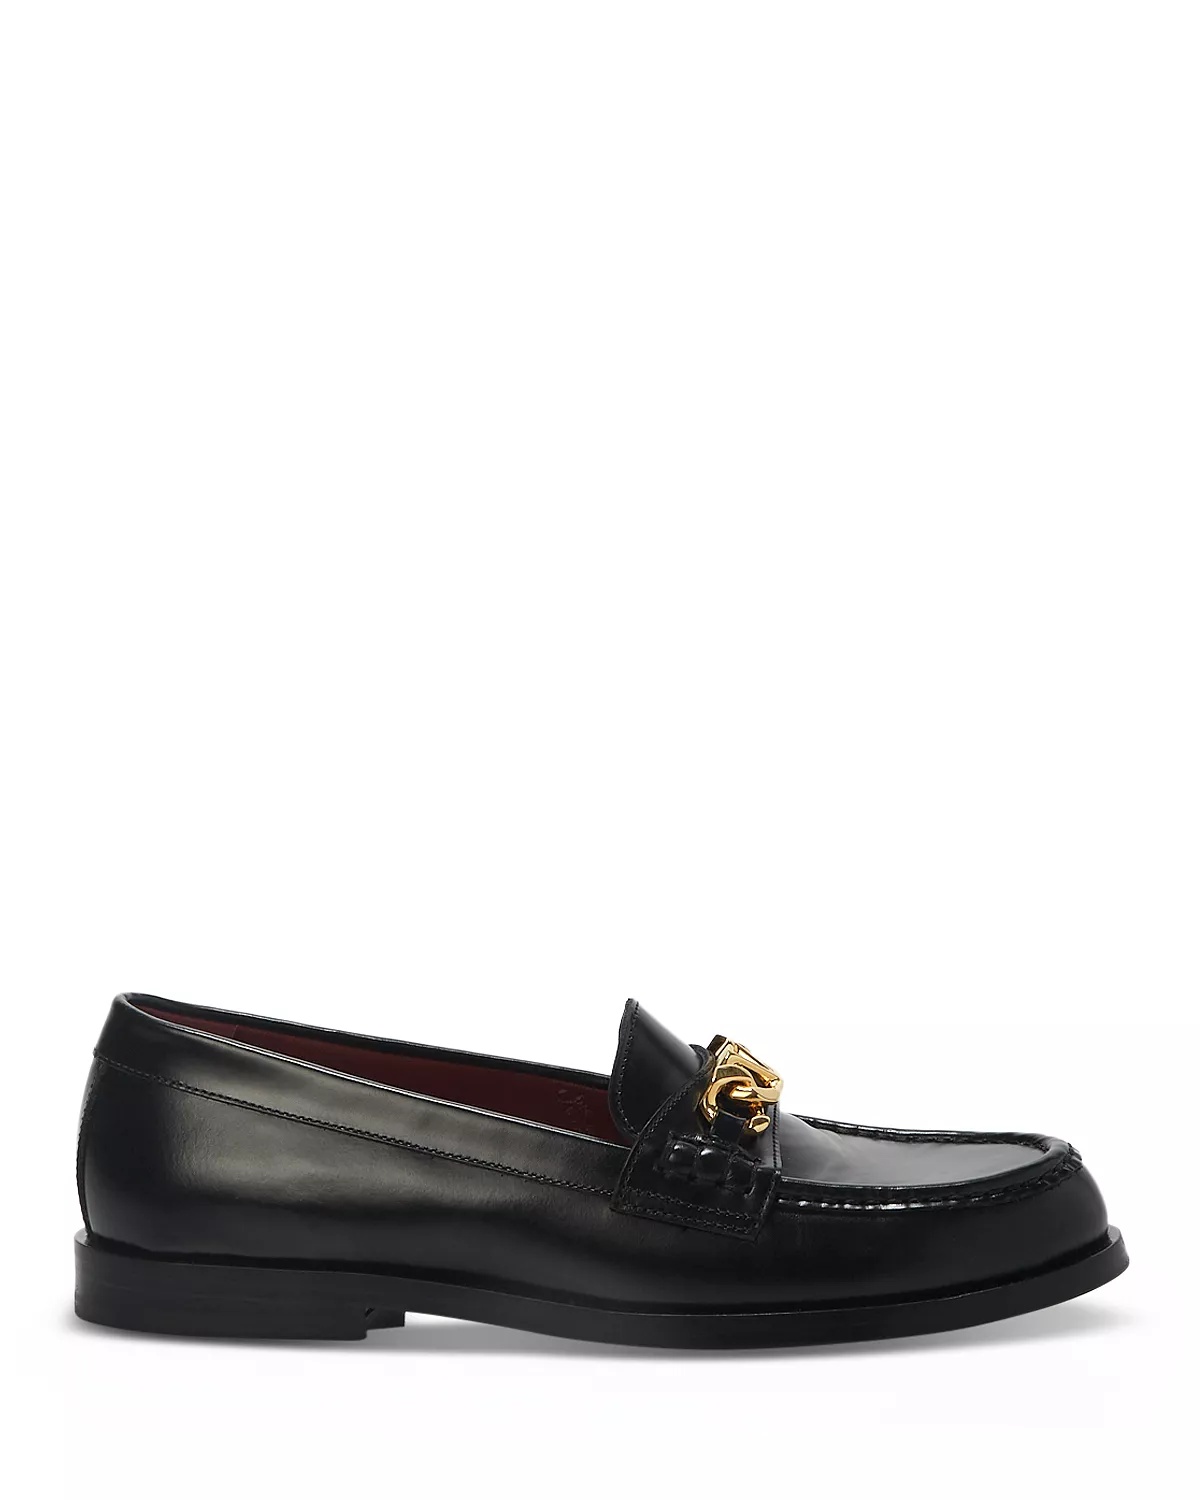 Women's Signature VLogo Loafers - 2